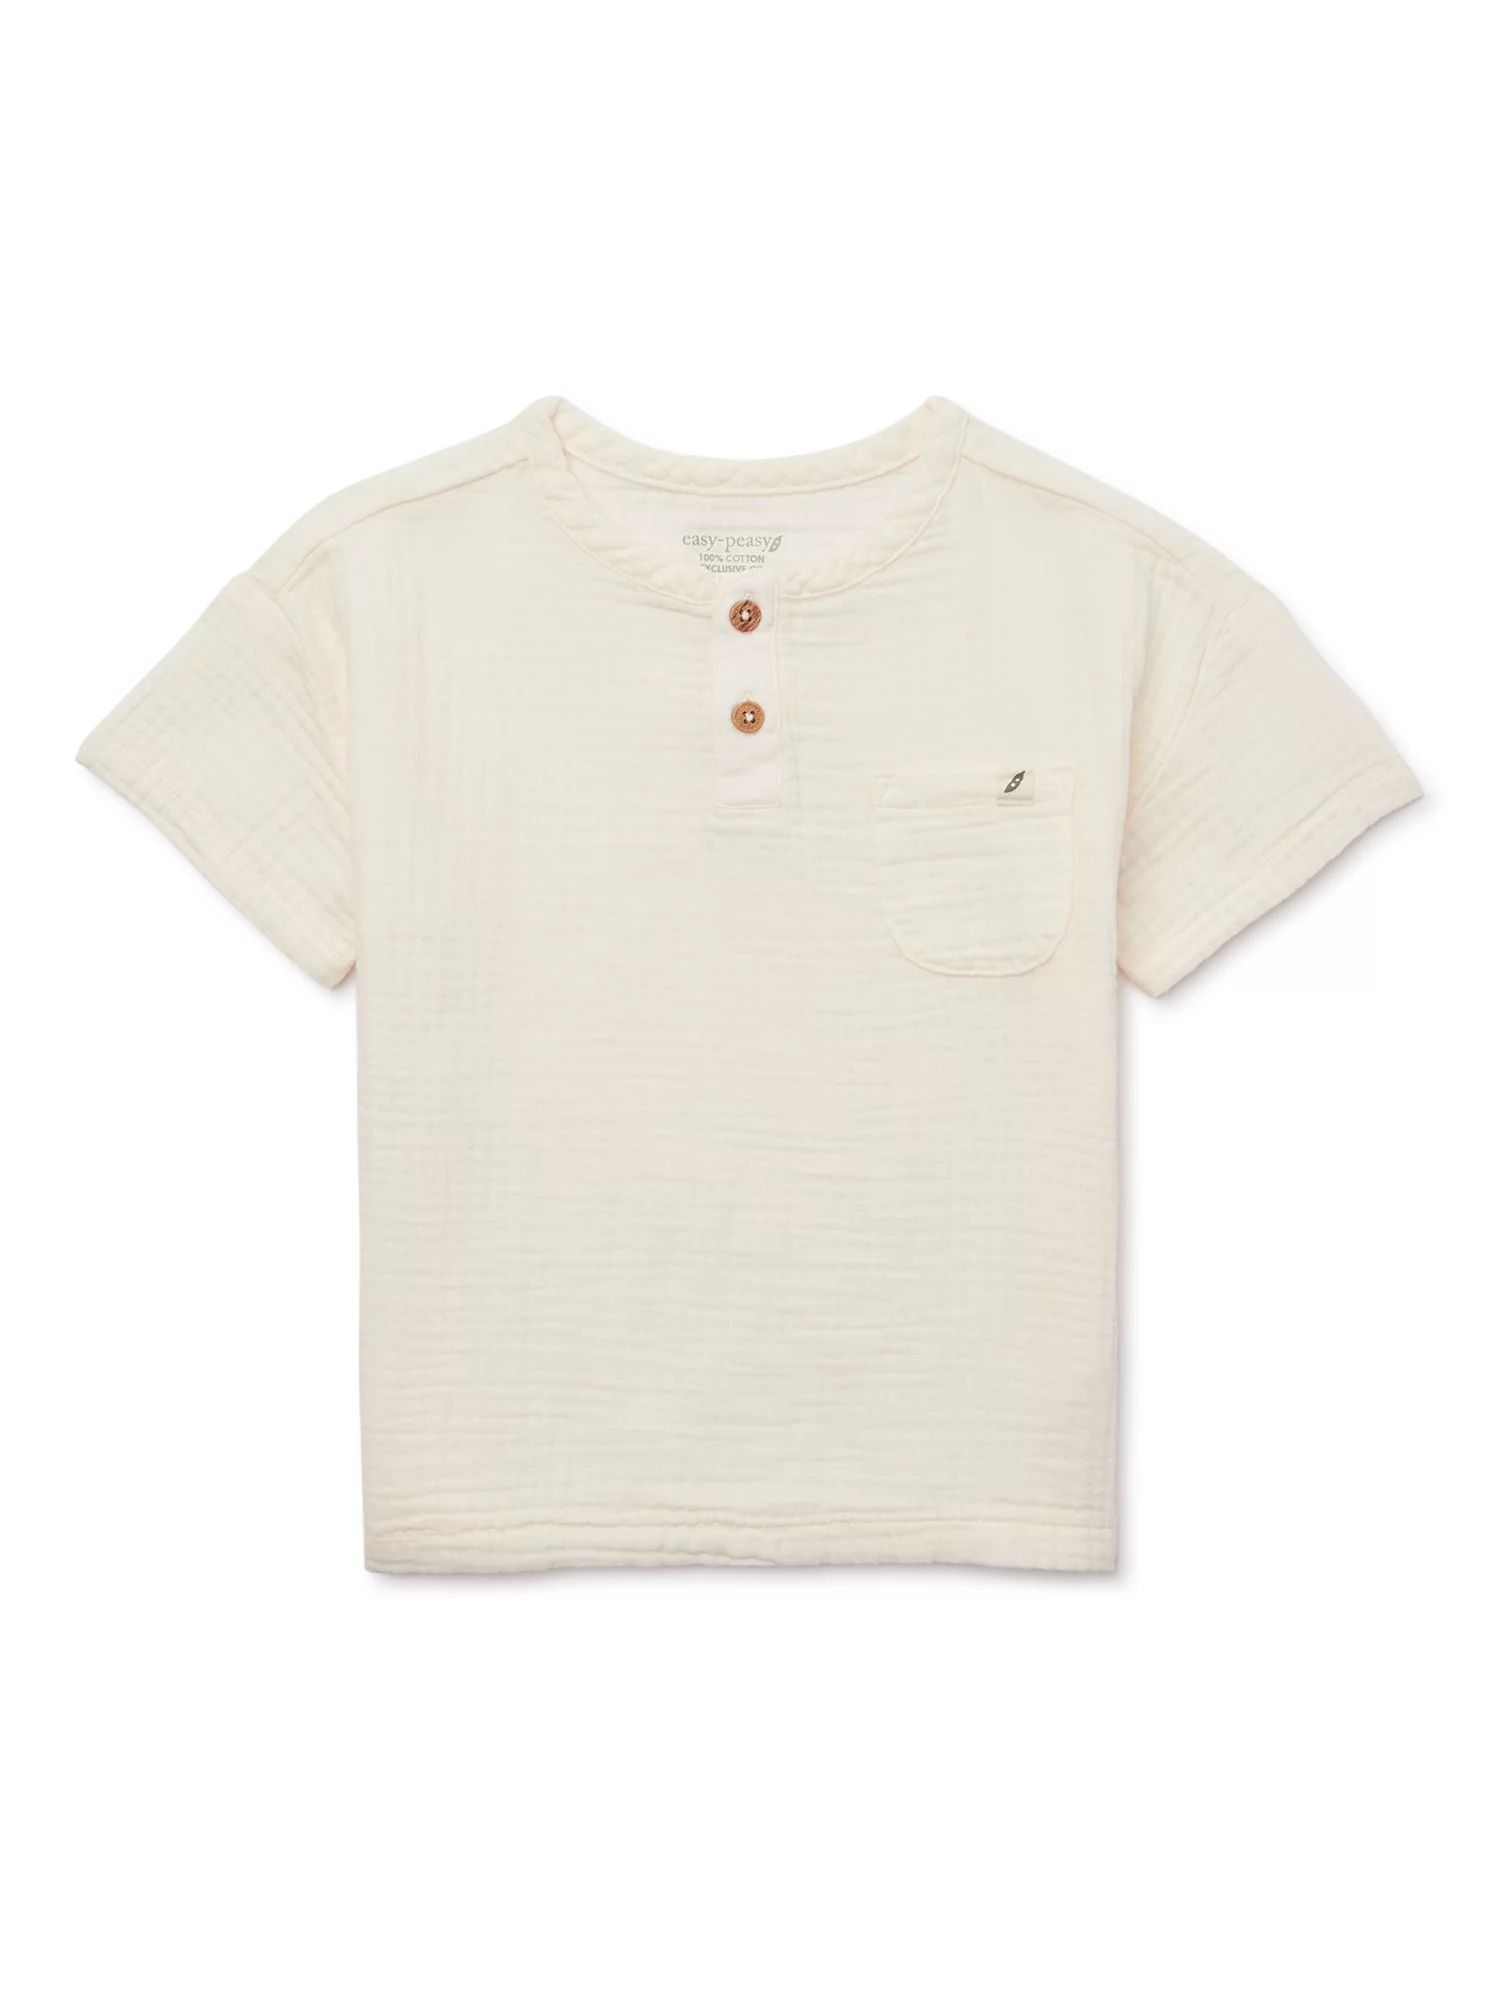 easy-peasy Baby and Toddler Boys Gauze Henley Tee, Sizes 12M-5T | Walmart (US)